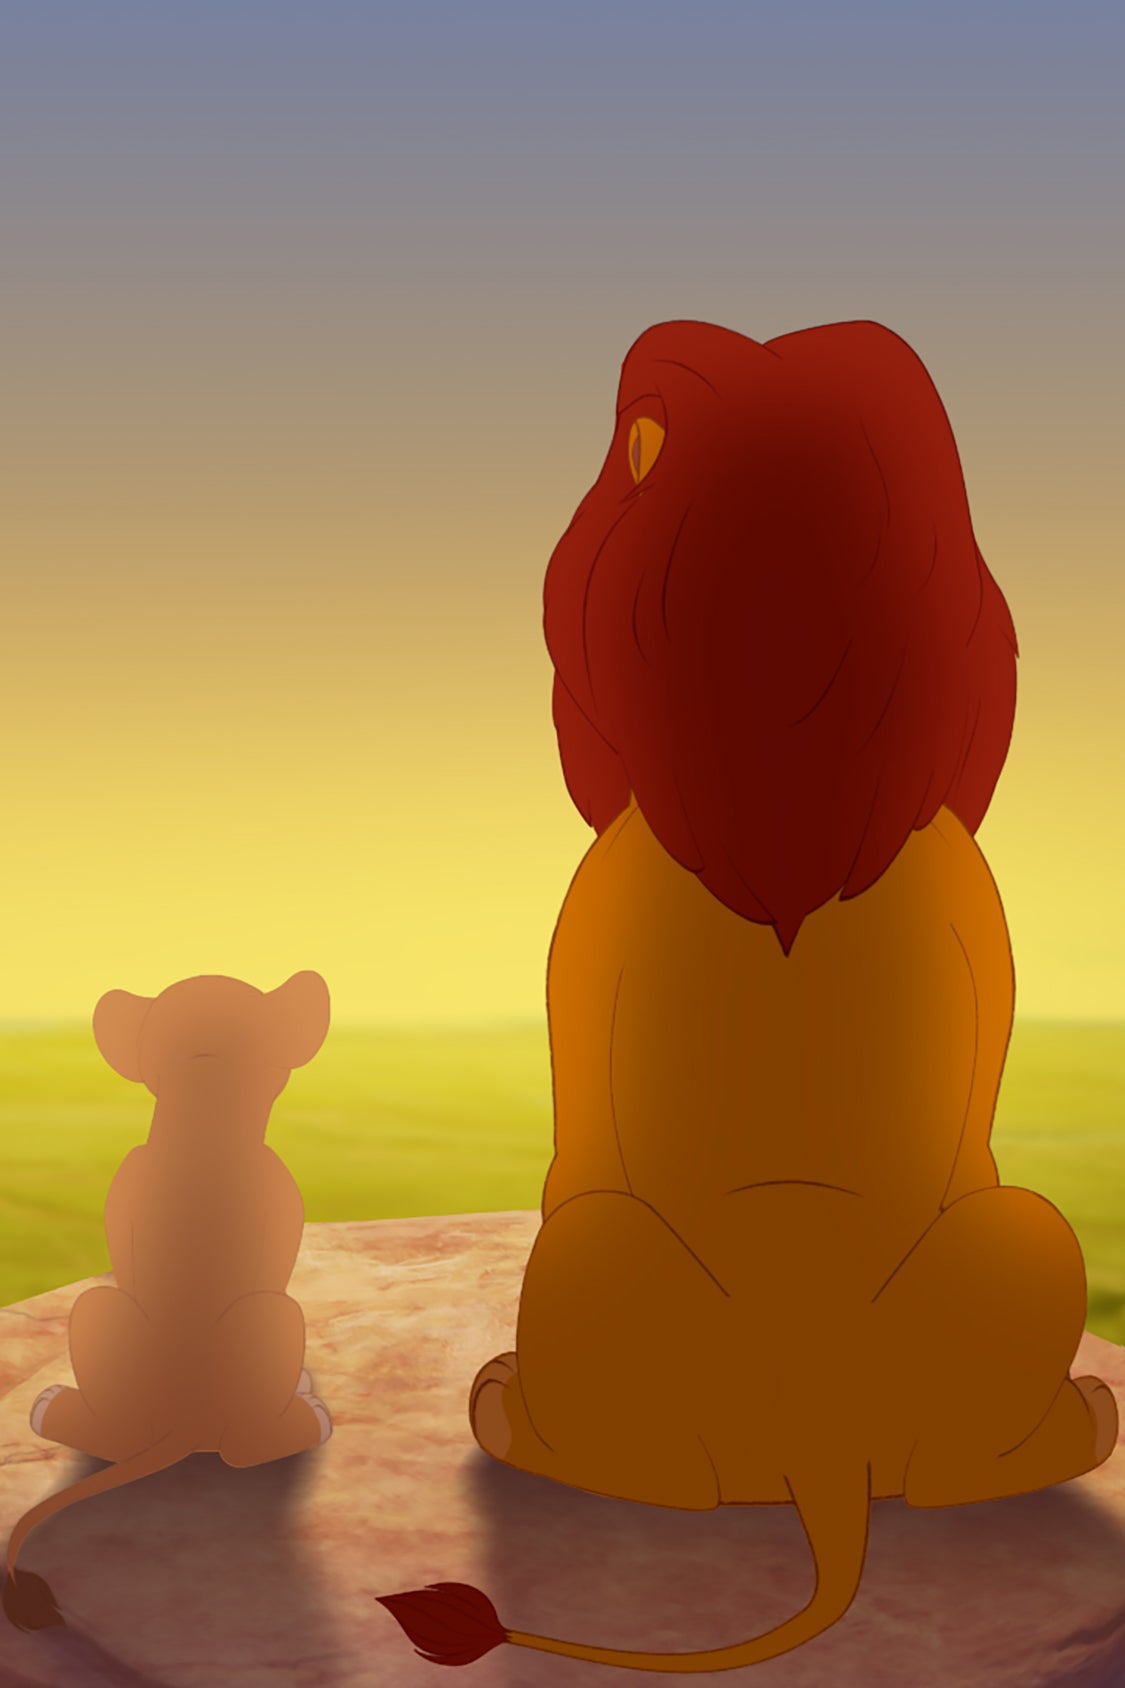 Disney's Next Live-Action Remake Is 'The Lion King' And We Can't Wait
